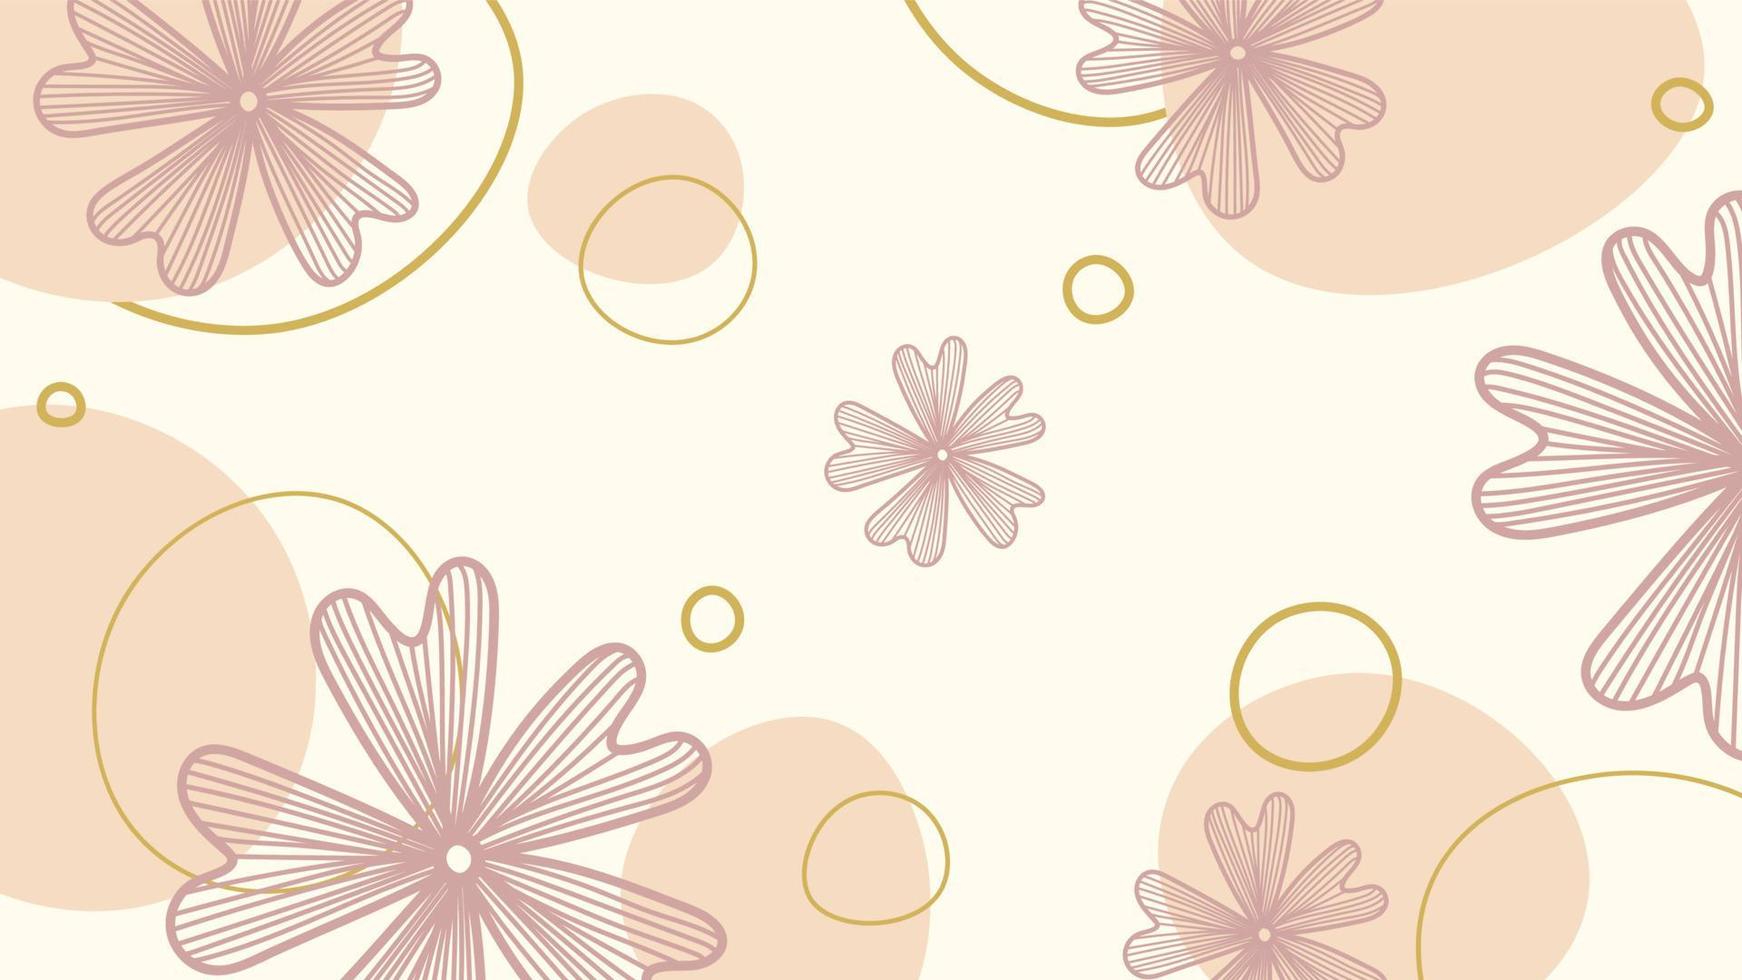 Abstract art background vector. Luxury minimal style wallpaper with art flower and organic round shapes. vector